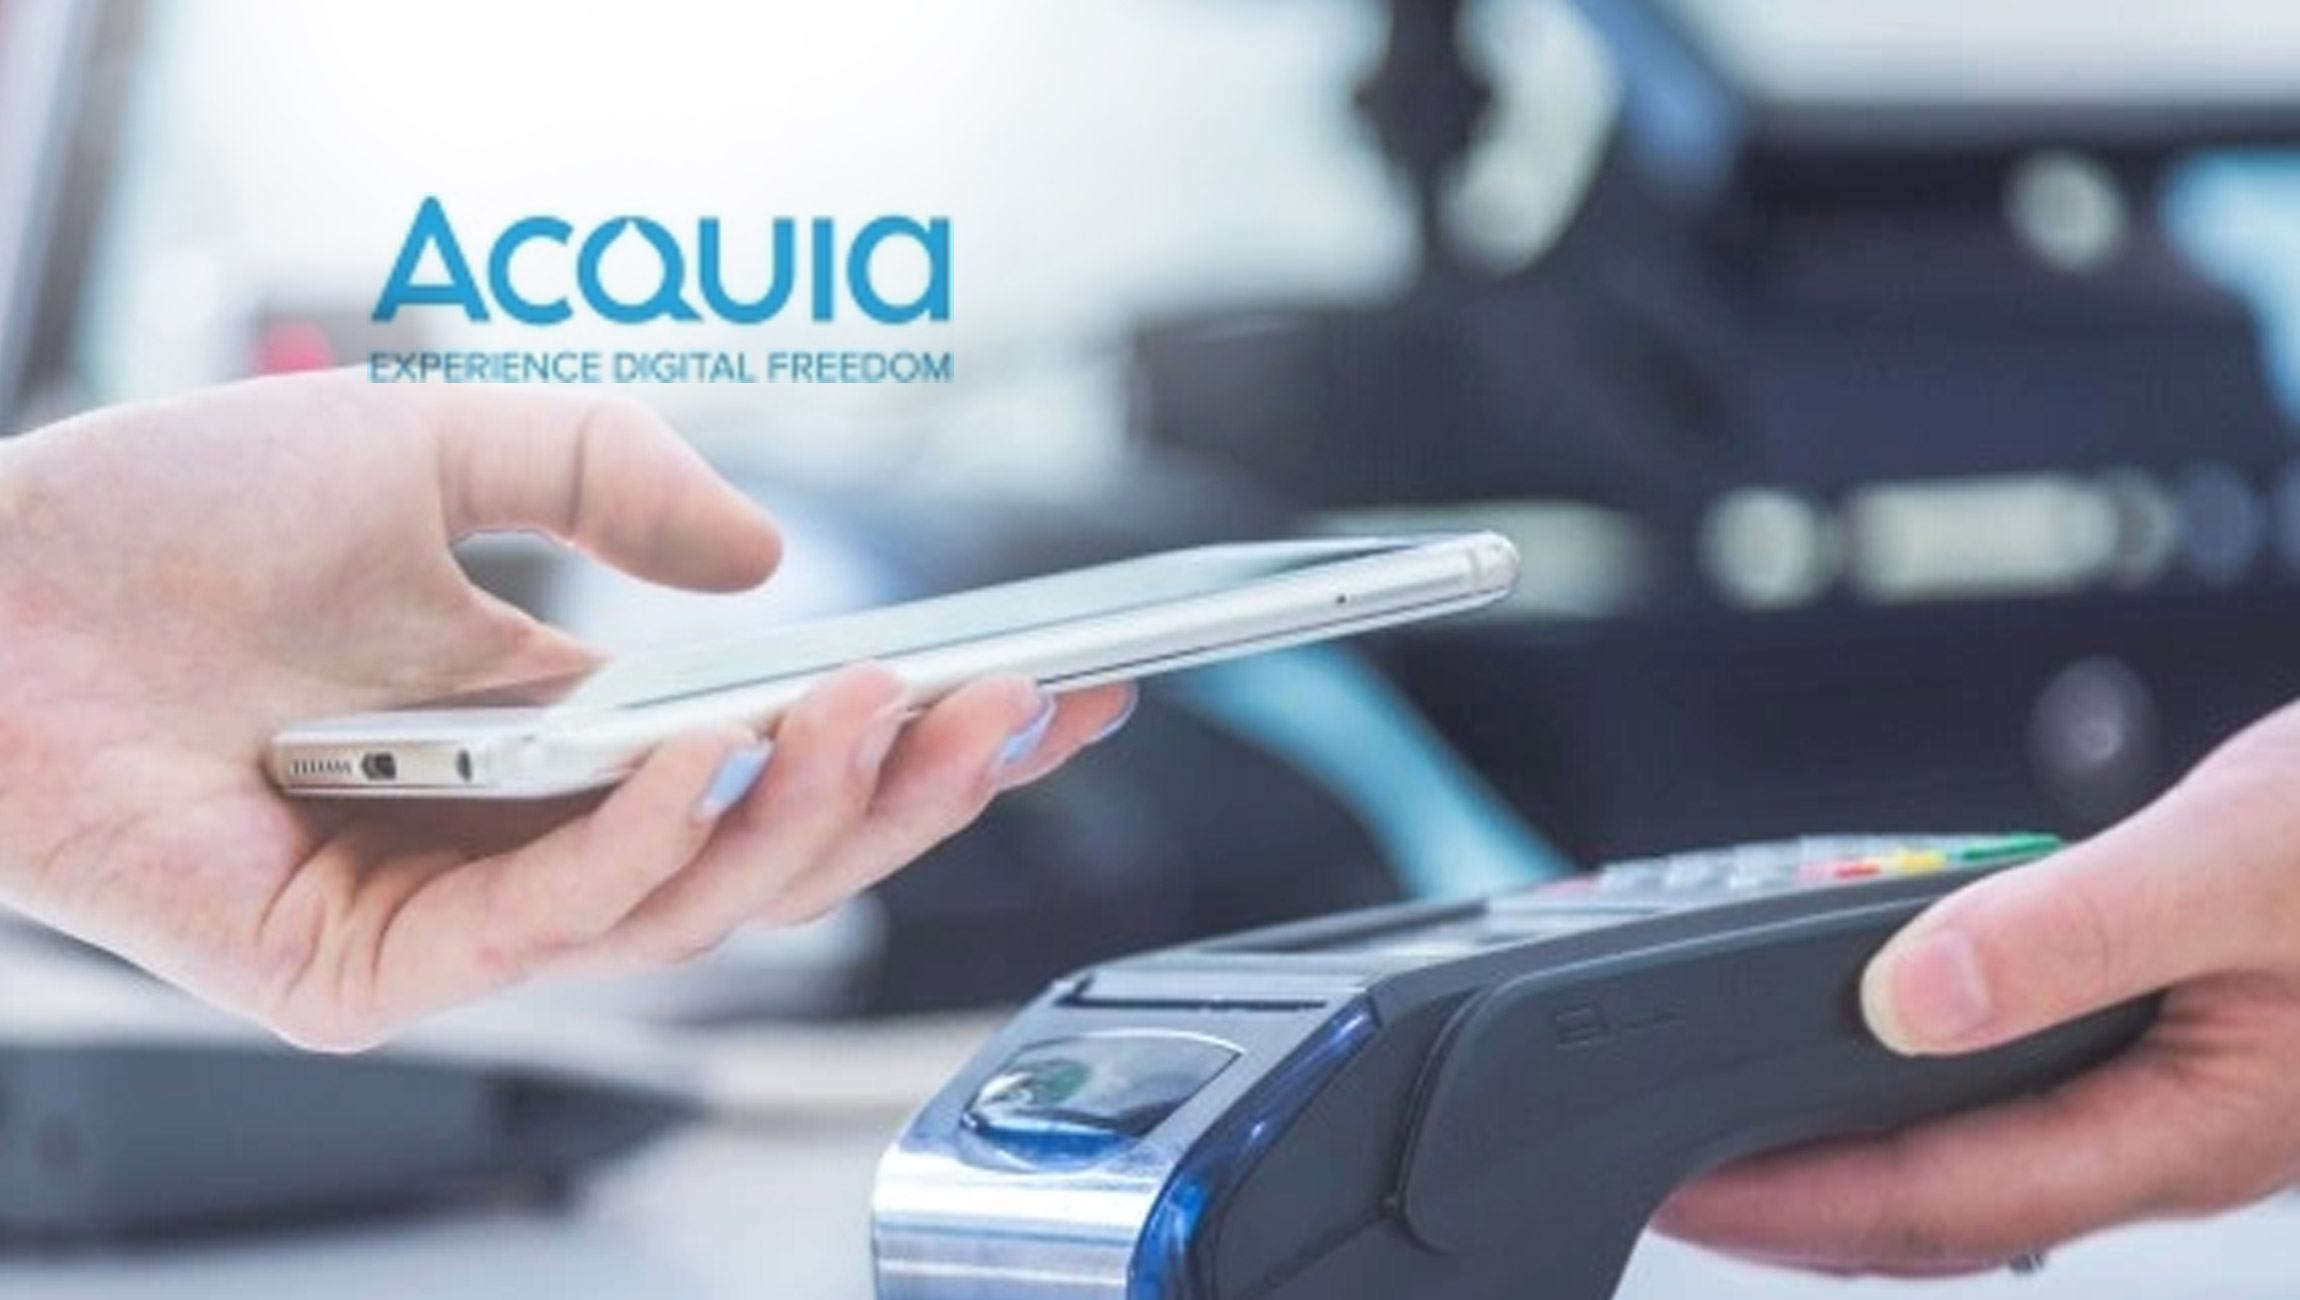 Acquia-Introduces-Retail-Machine-Learning-Models-to-Increase-Customer-Lifetime-Value